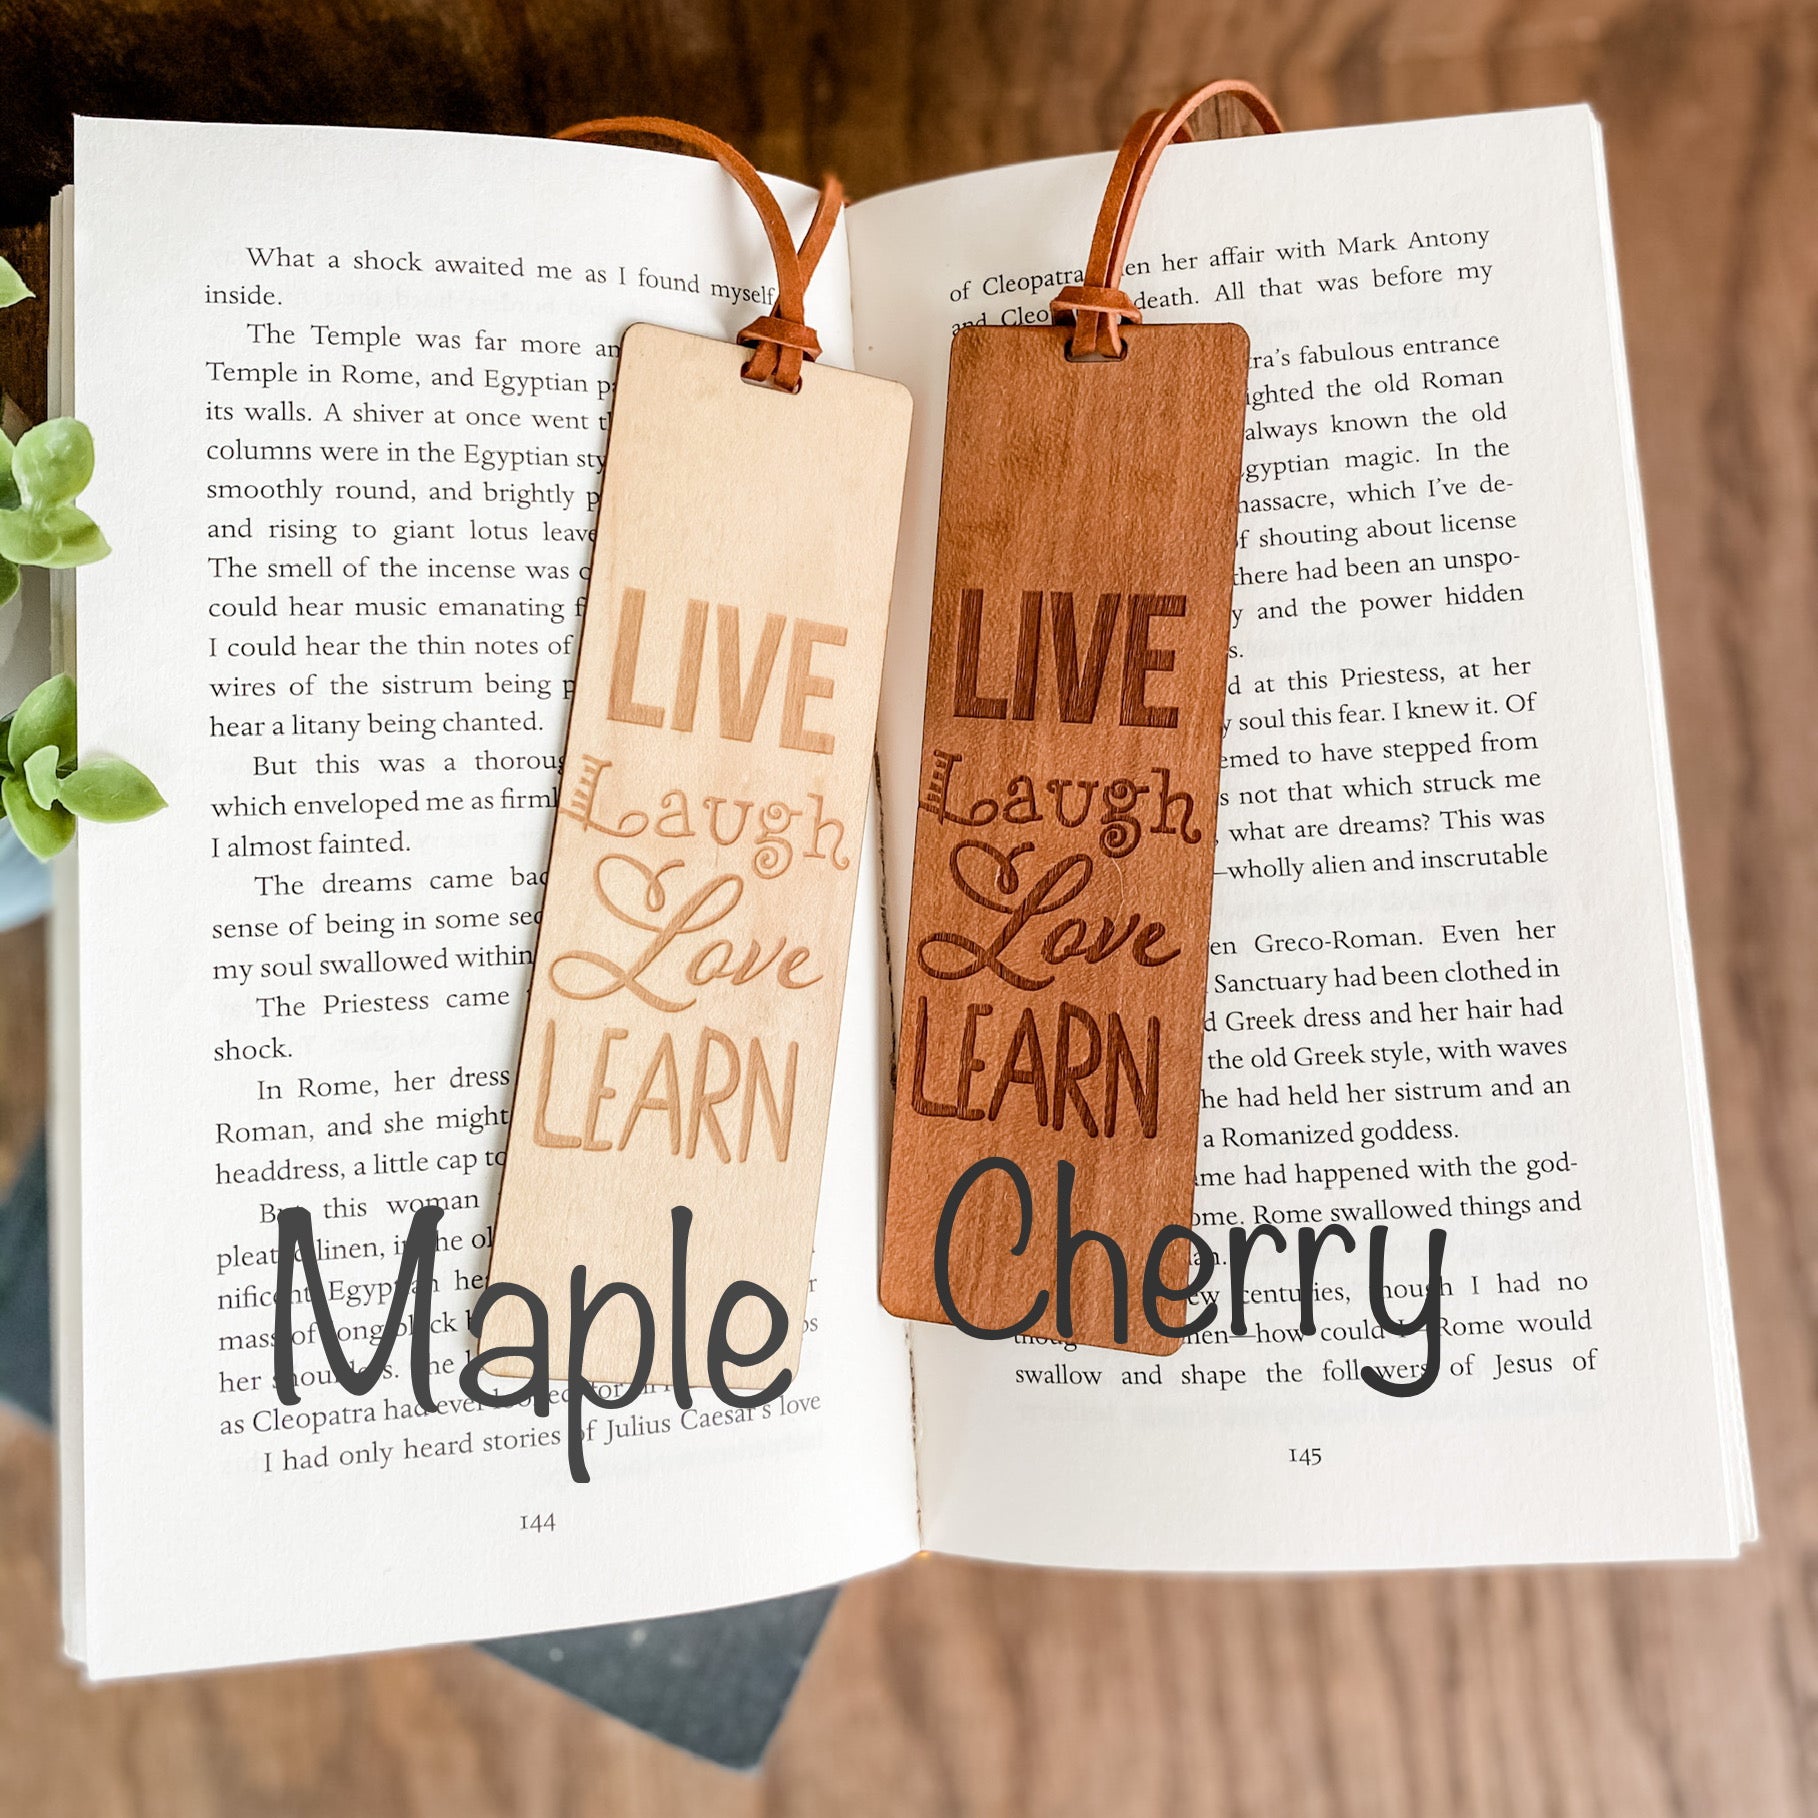 Personalized Wood Bookmarks, Custom Bookmark, Choice of design all